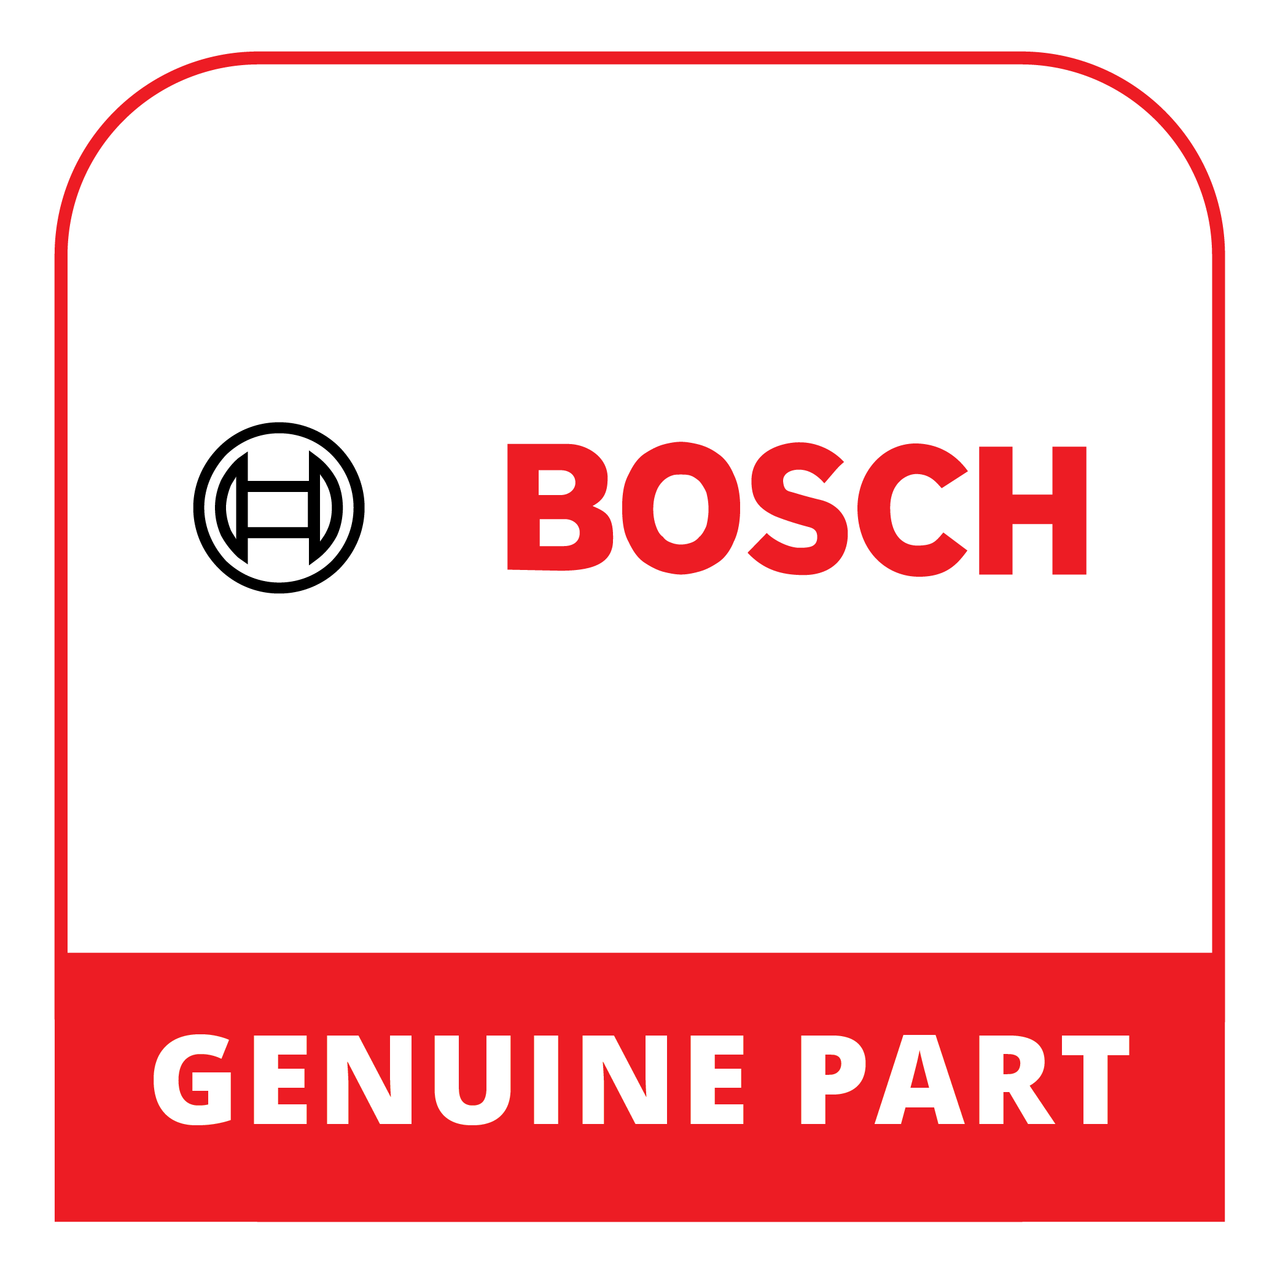 Bosch (Thermador) 12028682 - Cable Harness - Genuine Bosch (Thermador) Part